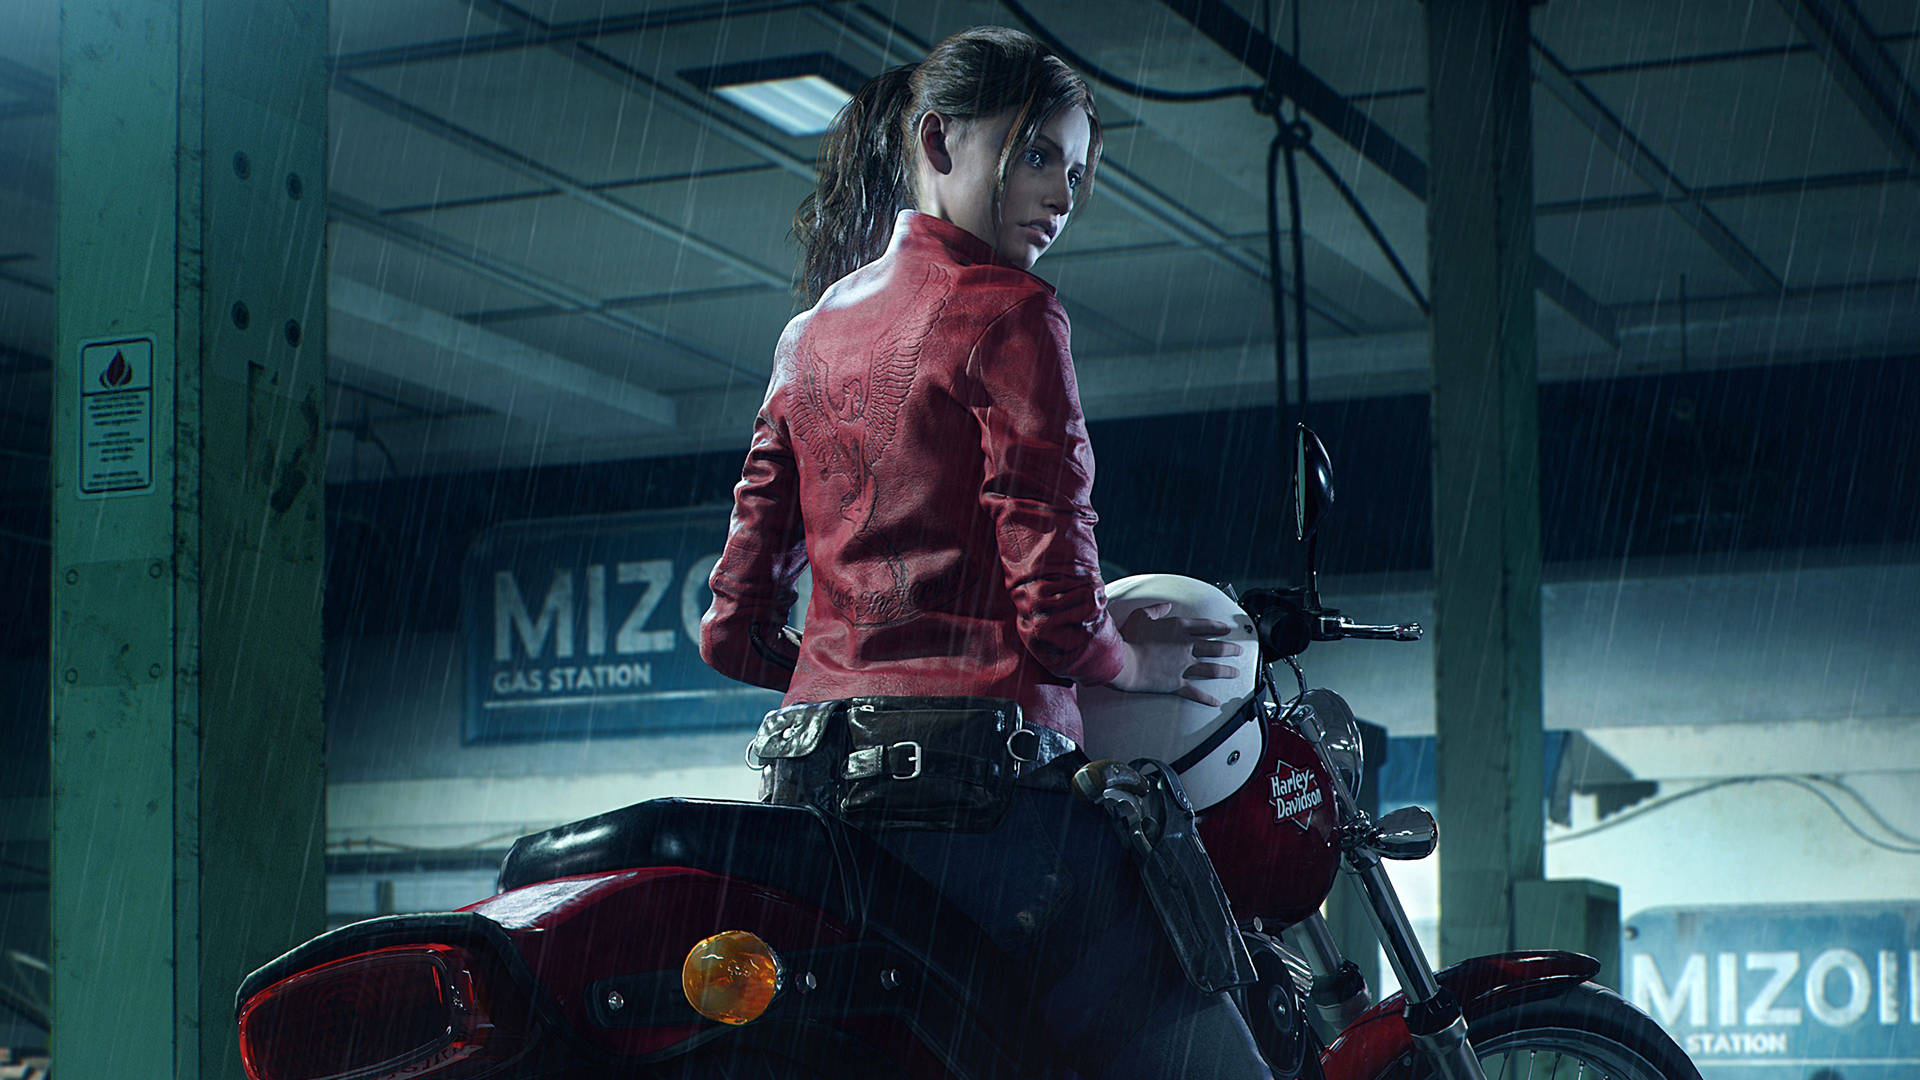 Claire riding her Harley-Davidson in “Resident Evil 2 Remake” Wallpaper